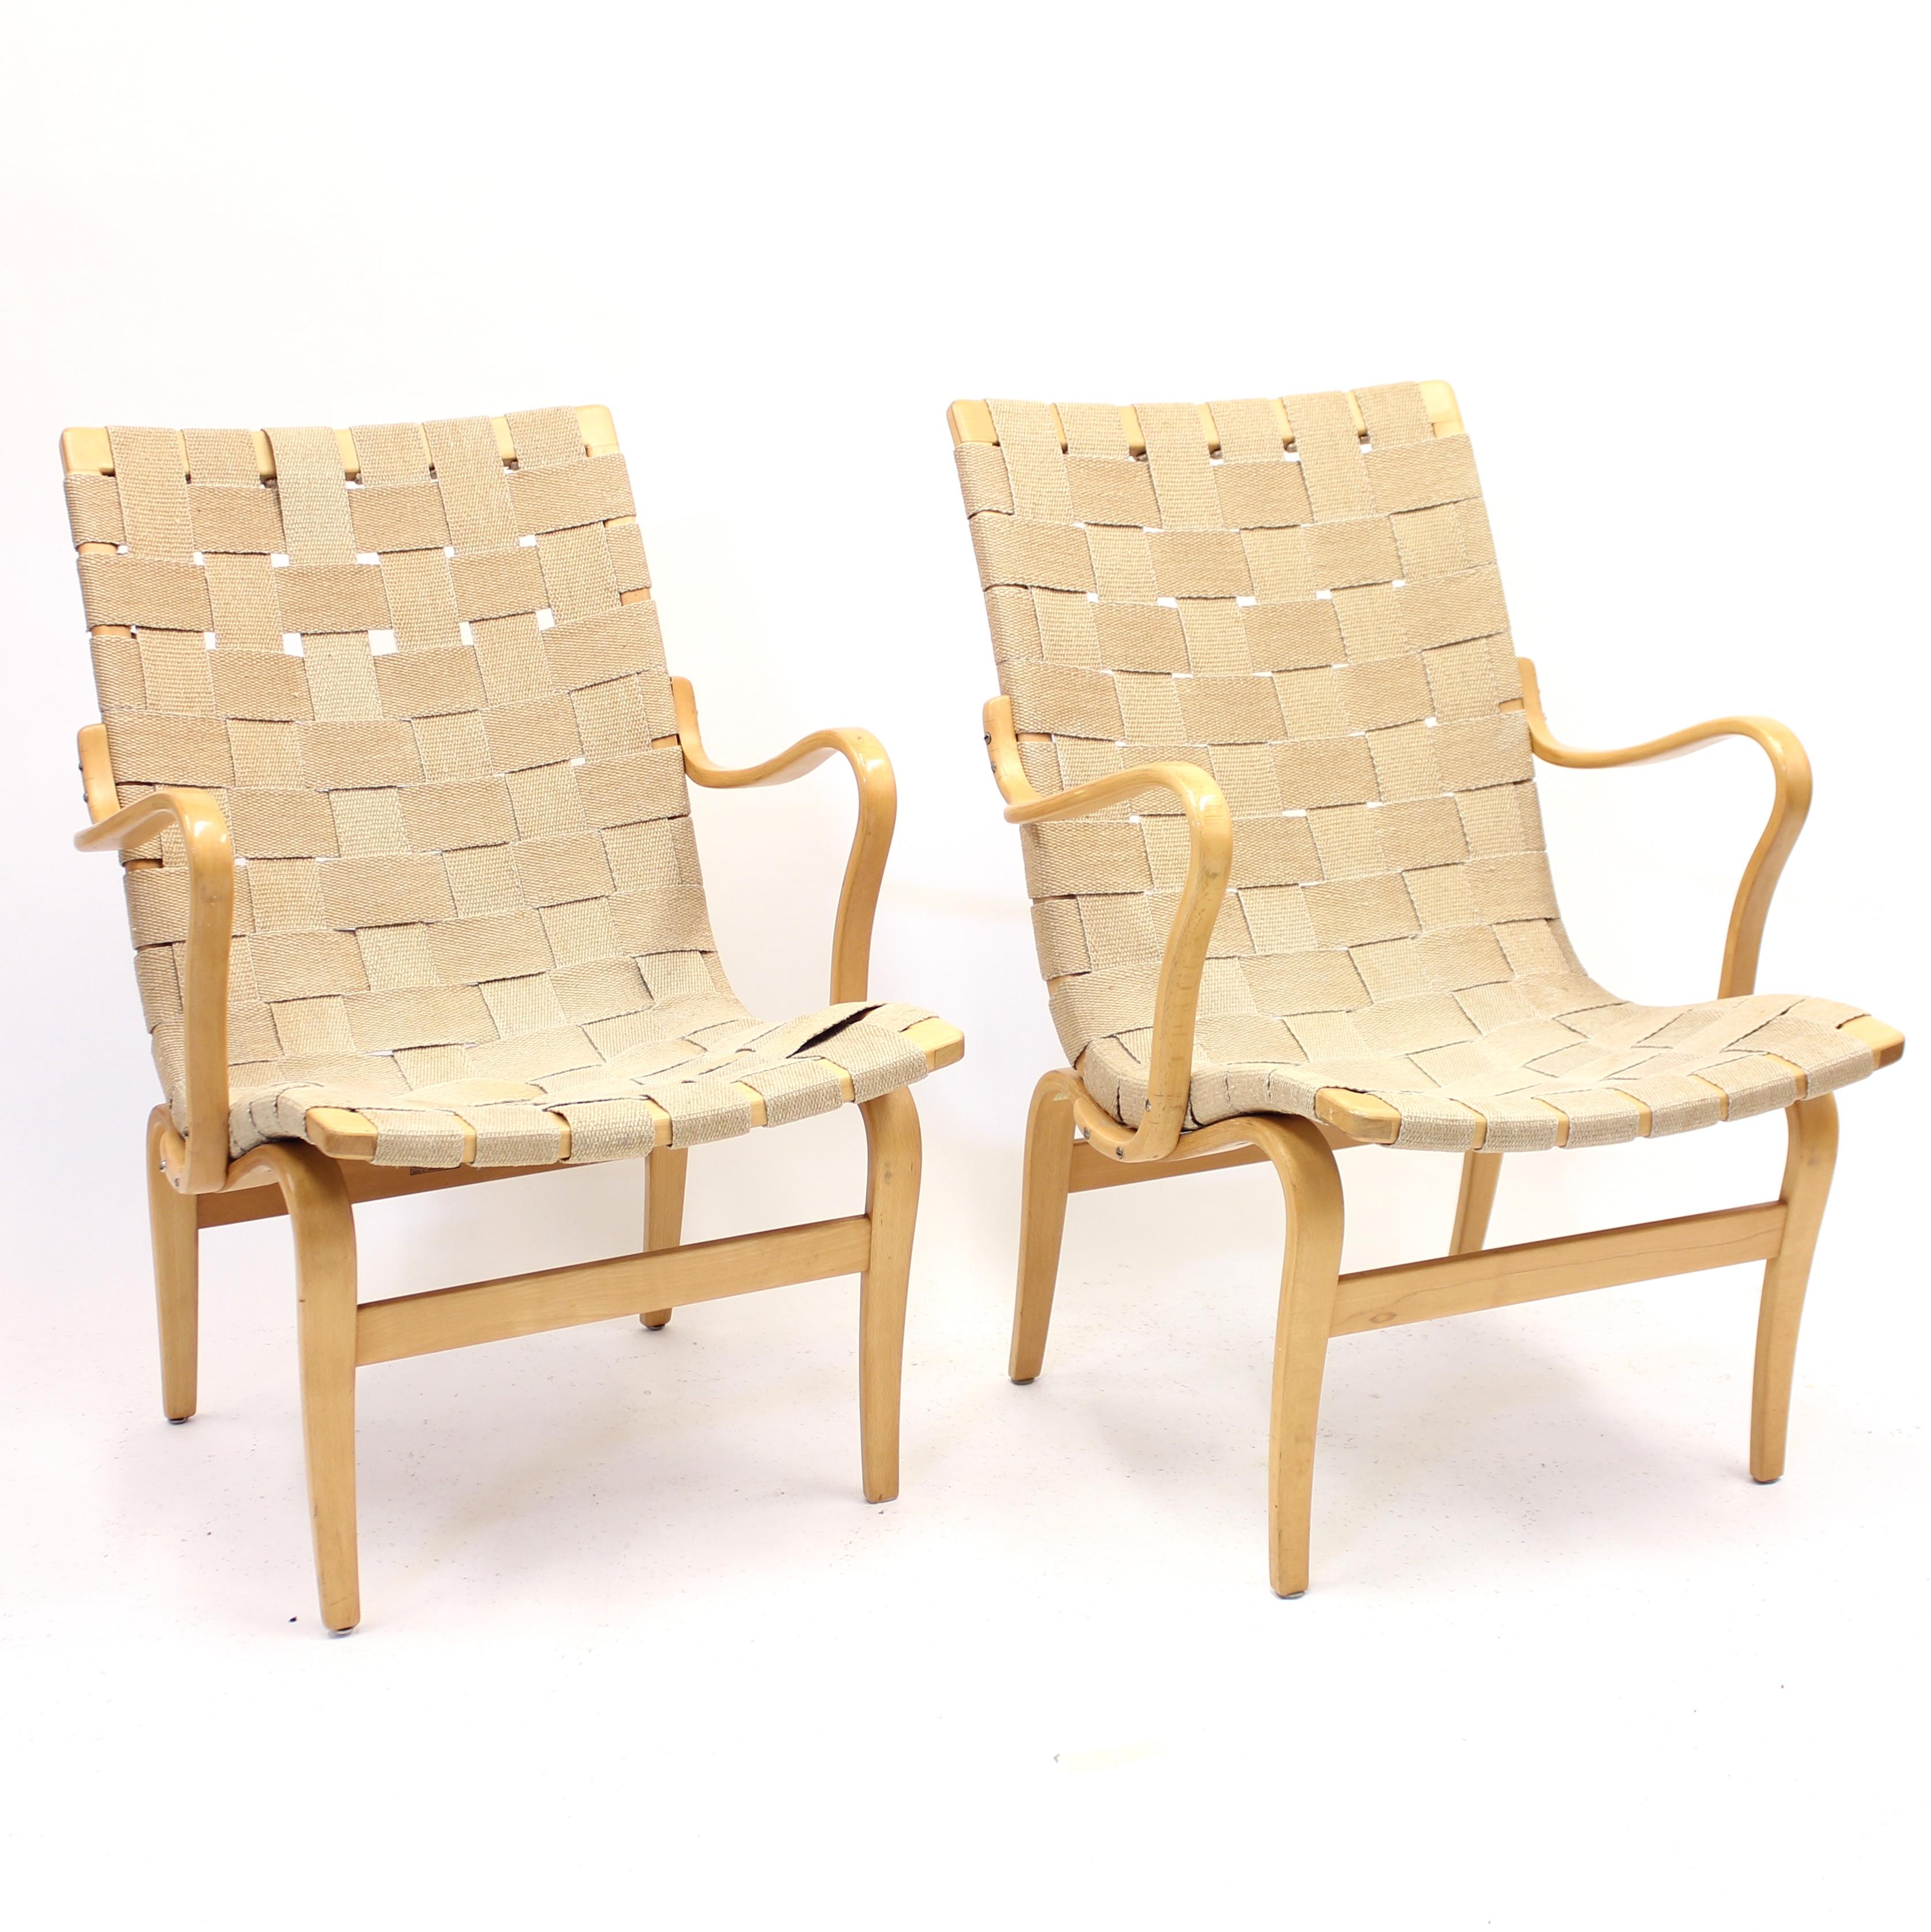 Pair of early production Eva chairs, designed by Bruno Mathsson for Karl Mathsson in 1940. This chair is also called model 41. These examples are from the 1950s. Both are stamped by maker and one of them has the original paper labels that can only